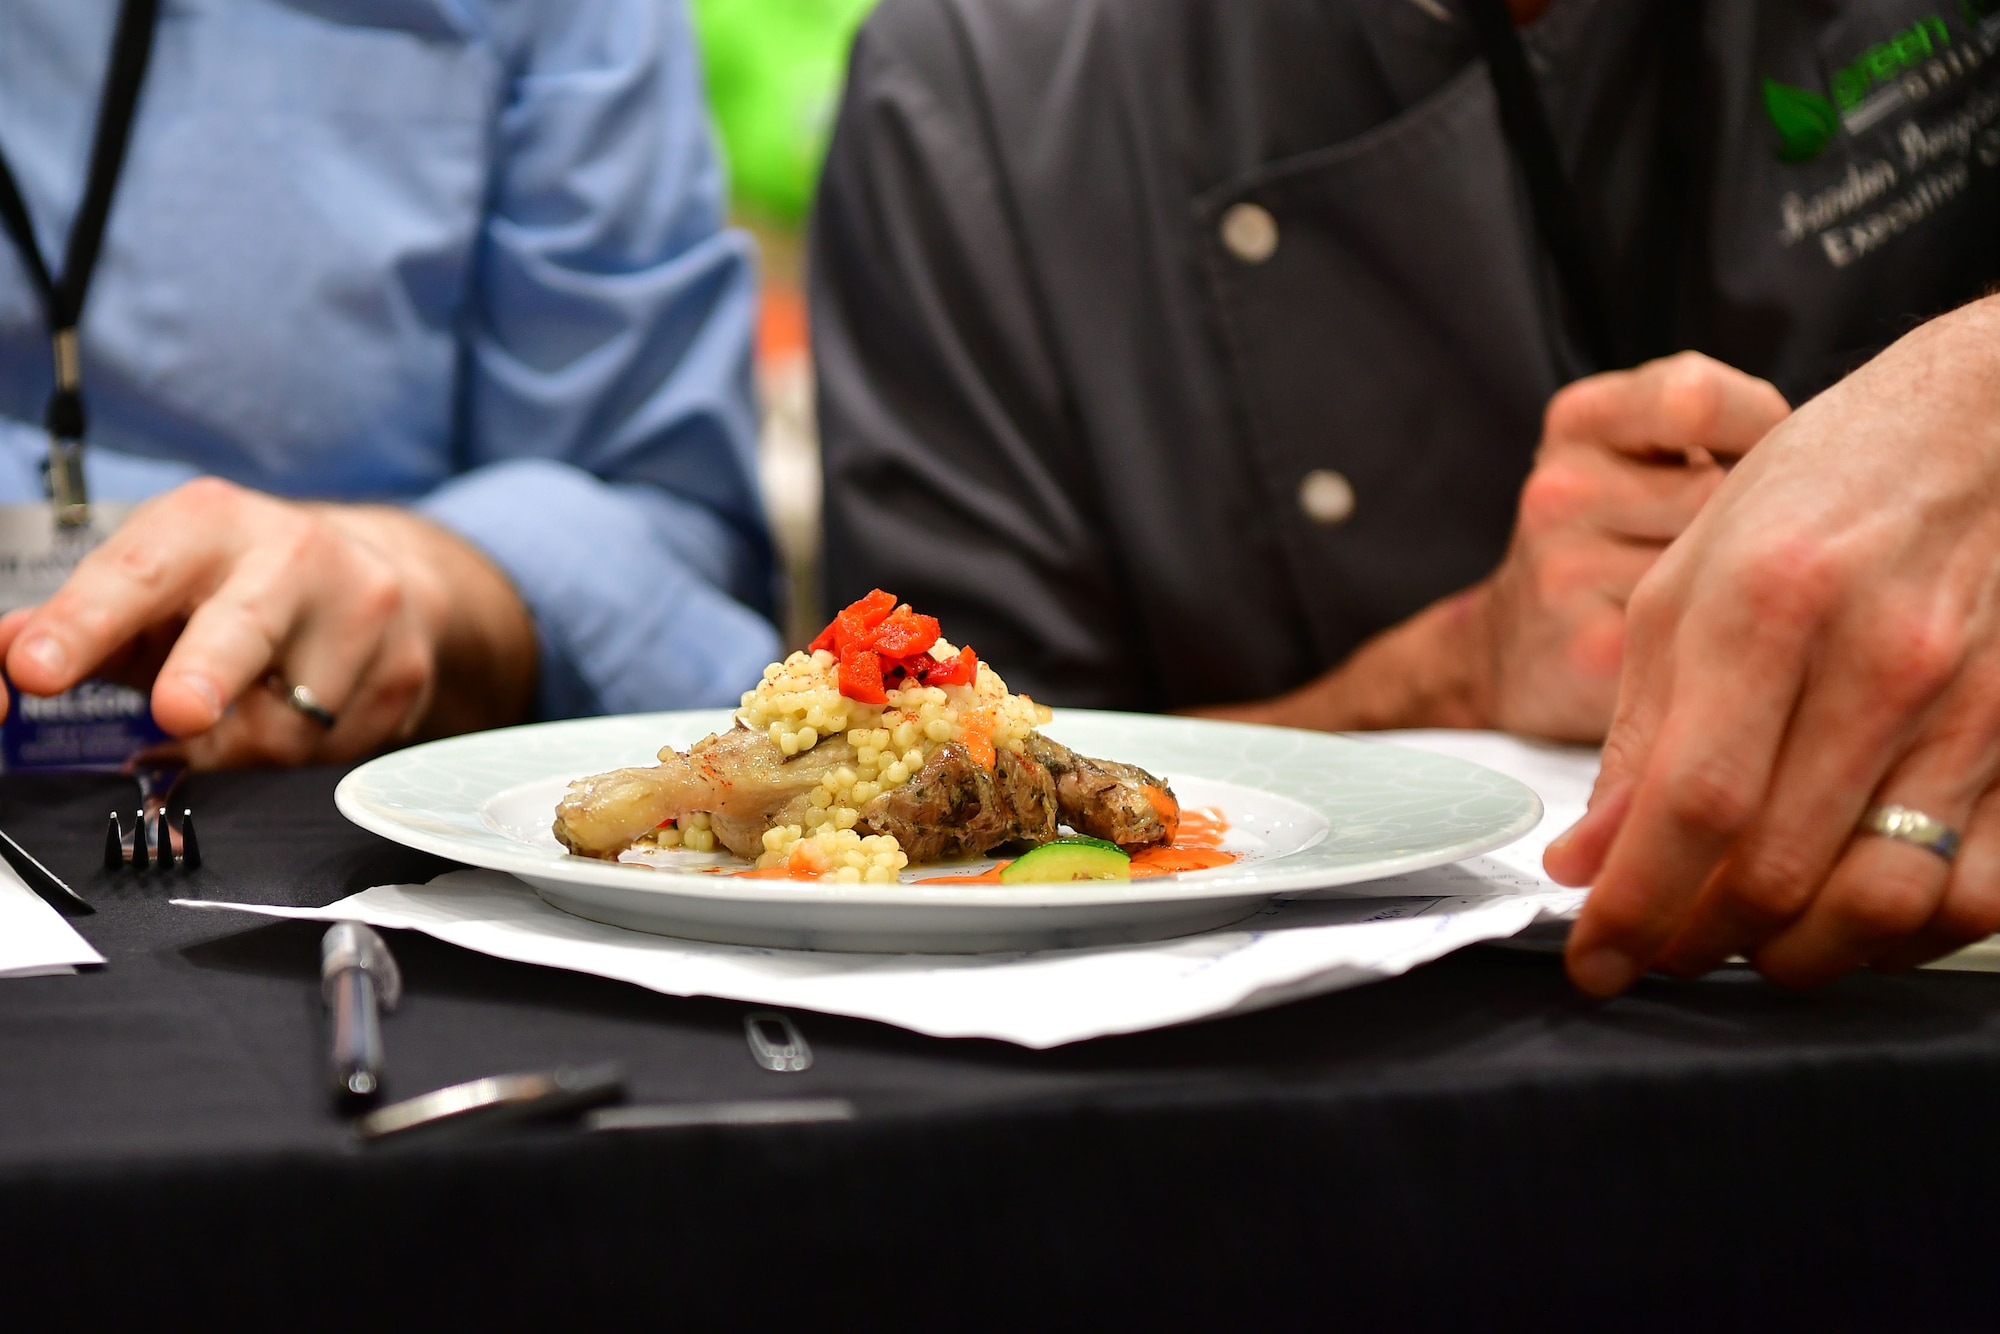 Judges prepare to taste test the contestant’s dishes.